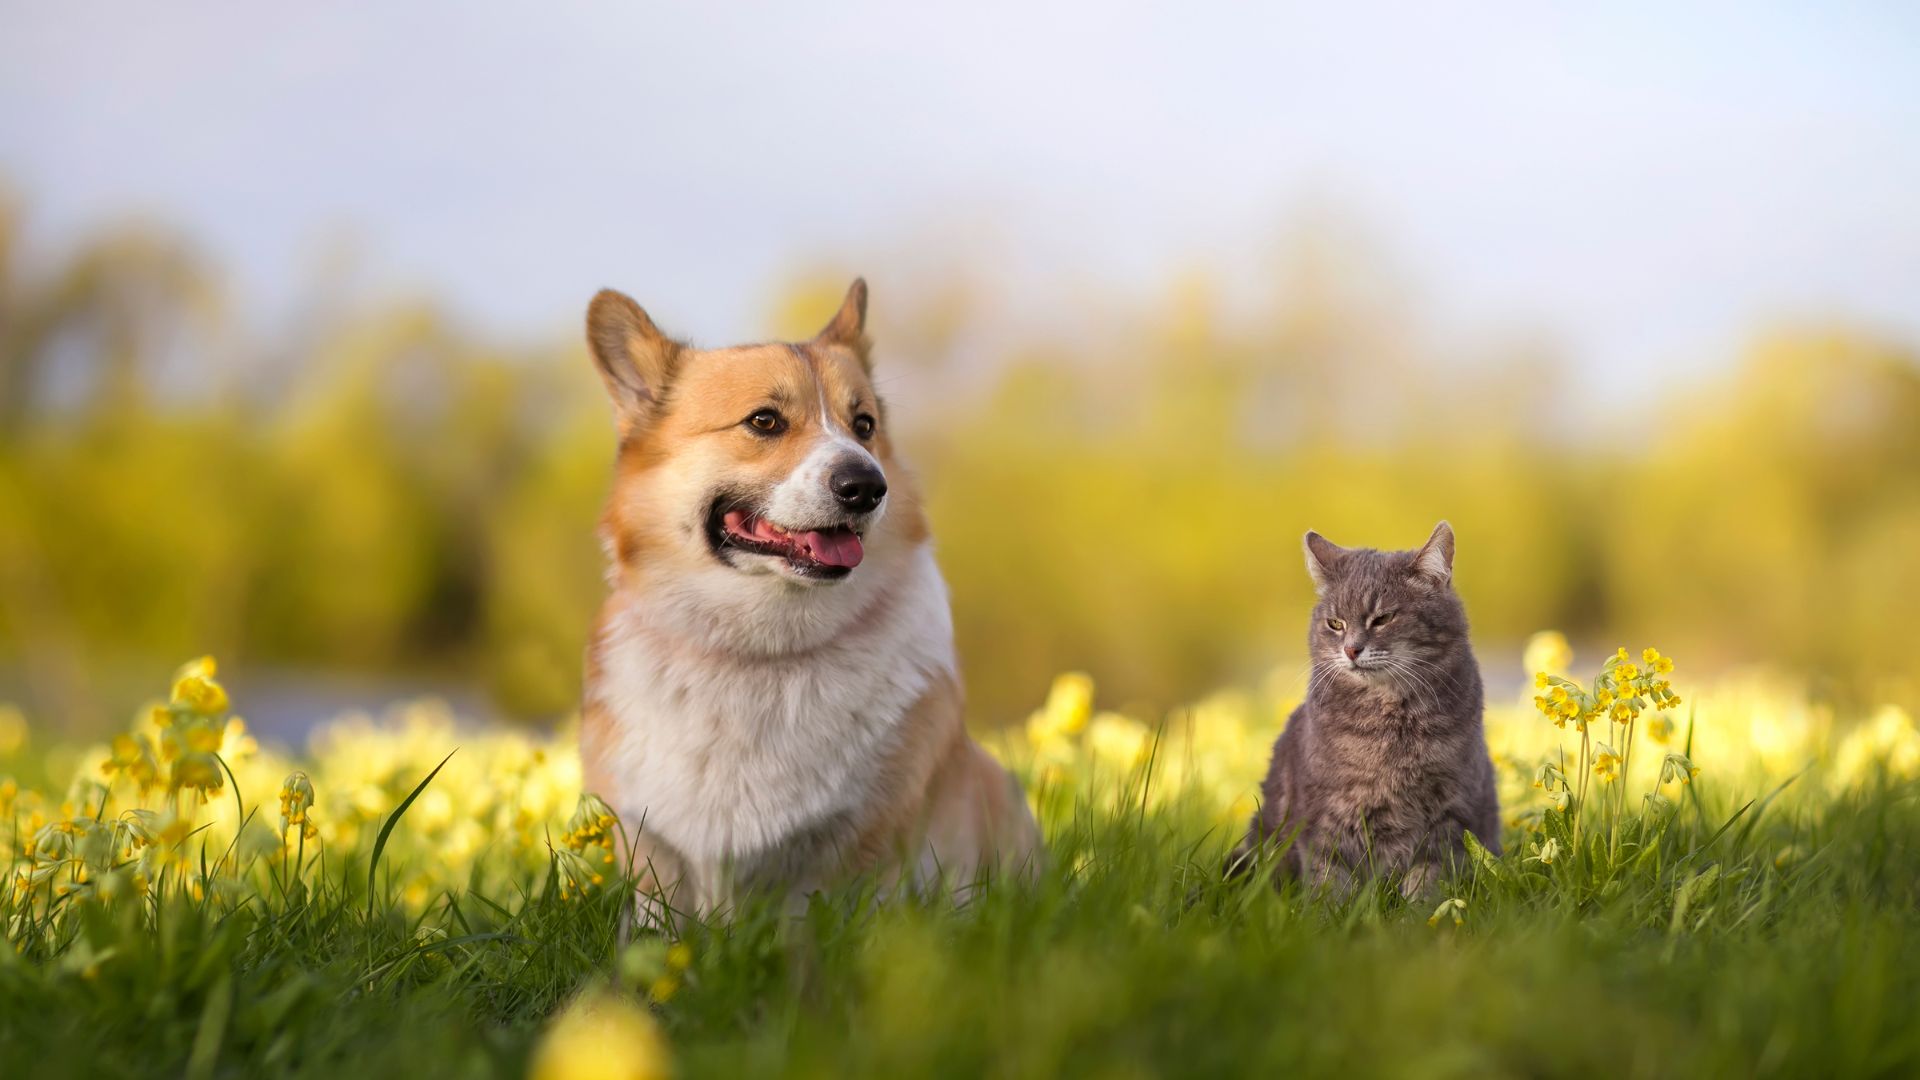 cat and dog sitting in grass